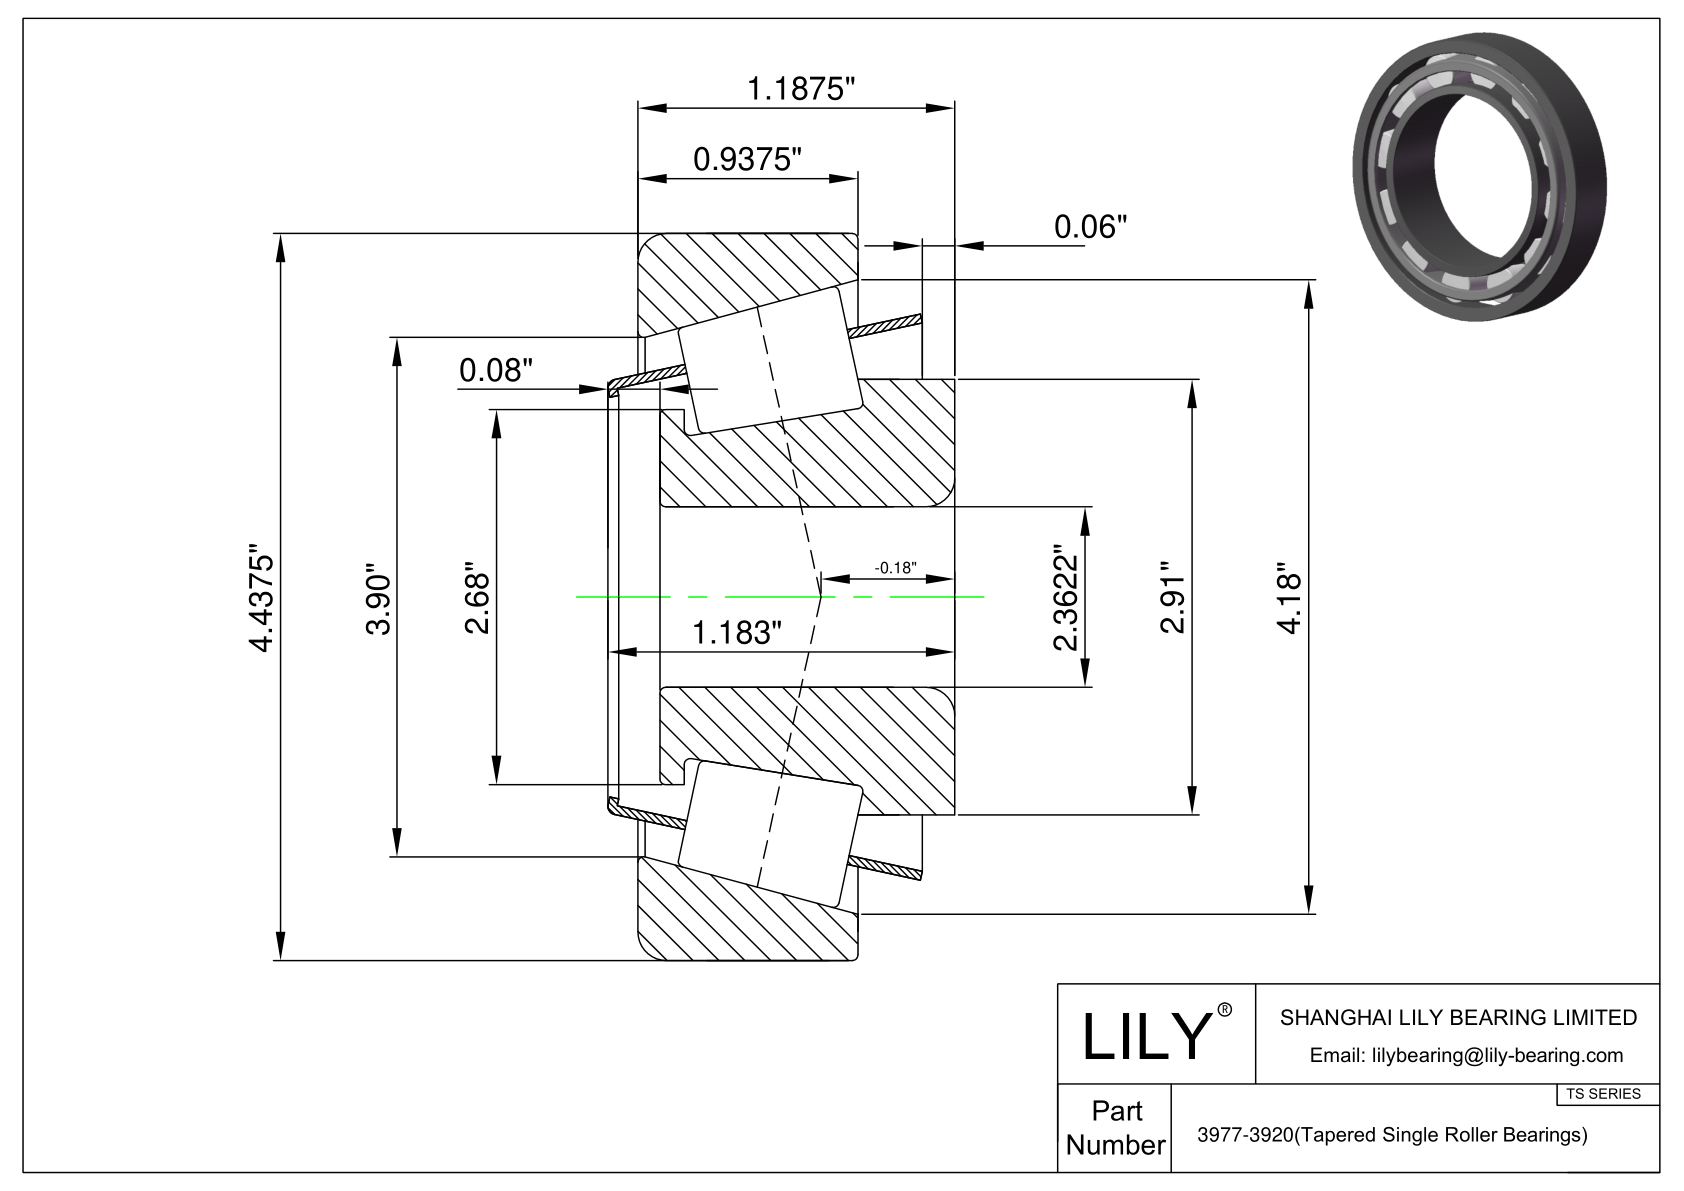 3977-3920 TS (Tapered Single Roller Bearings) (Imperial) cad drawing